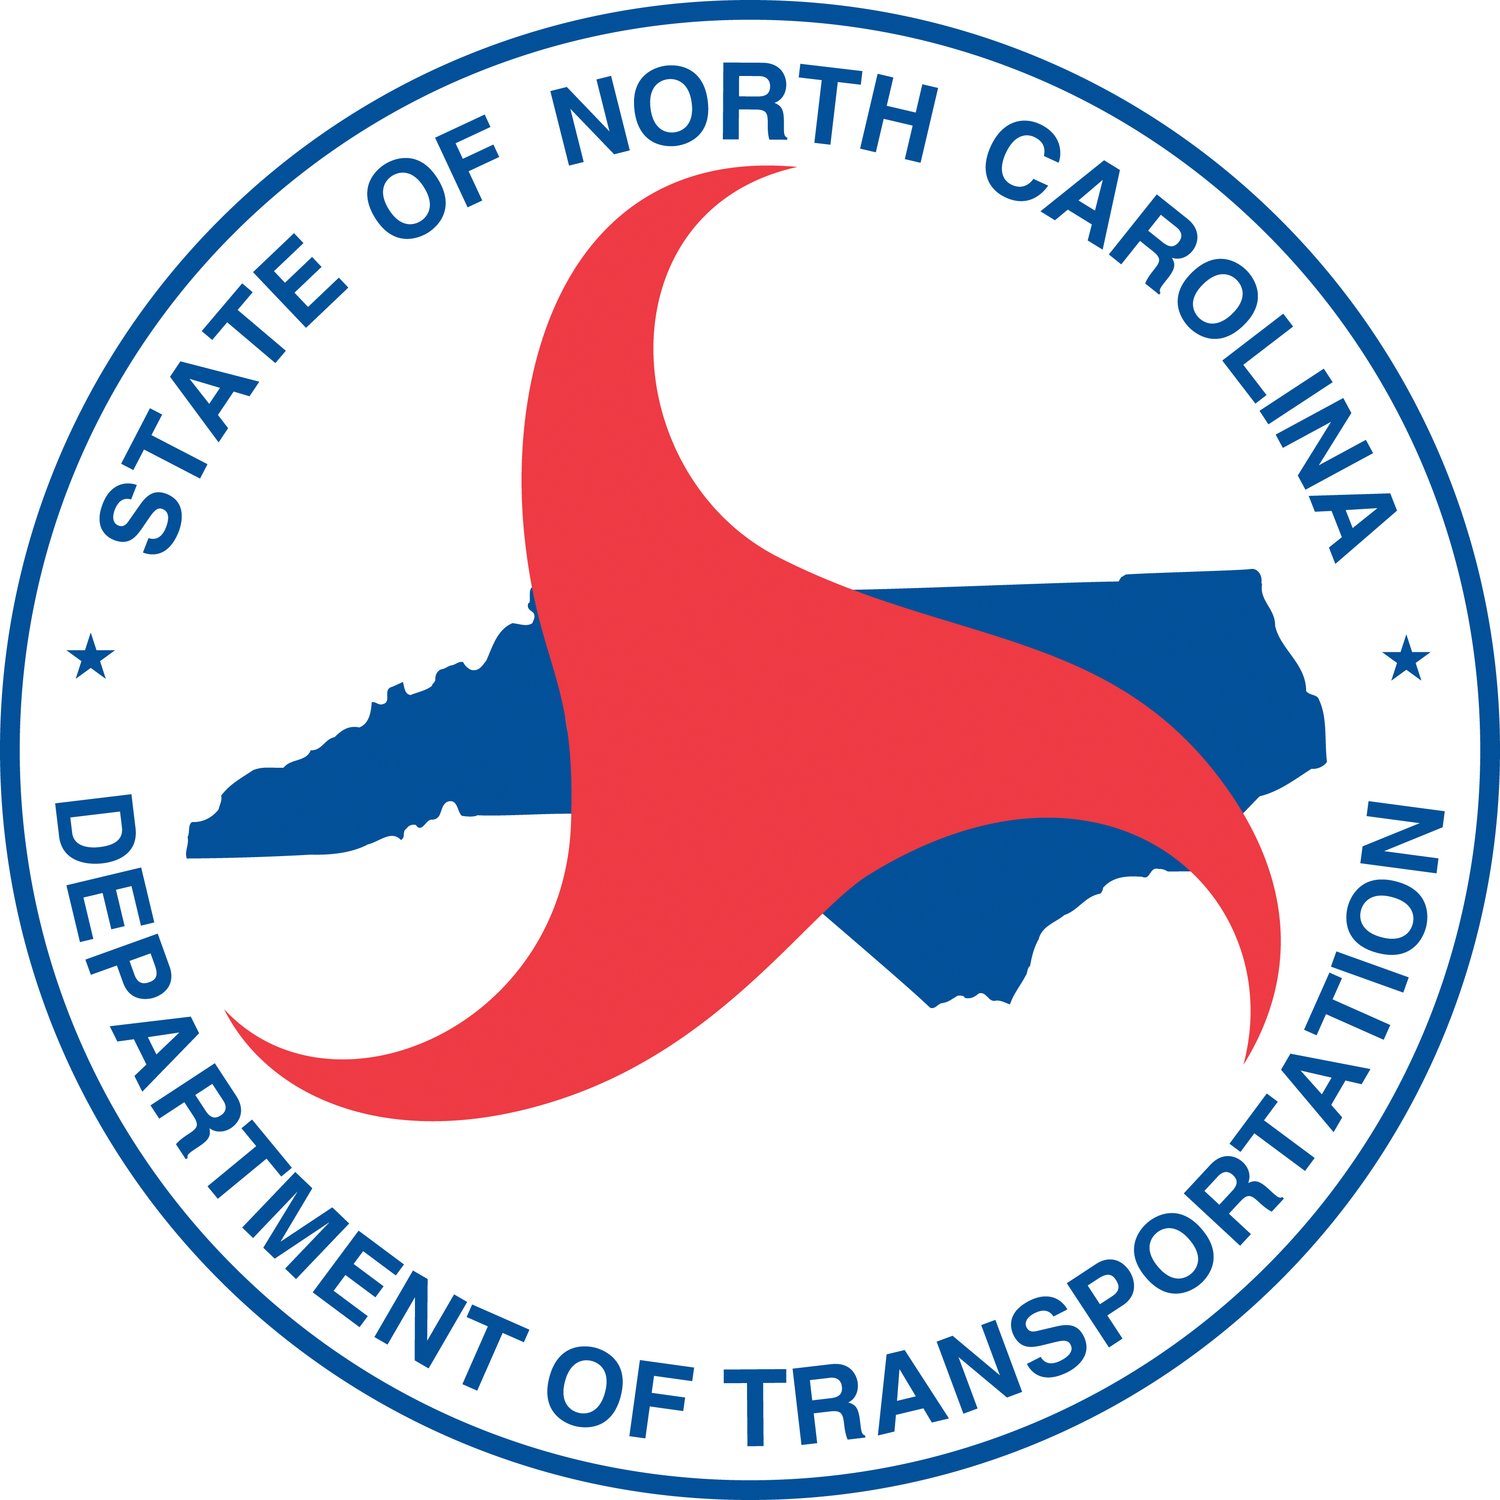 The N.C. Department of Transportation has awarded a $247 million contract to widen an eight-mile section of Interstate 95 north of Lumberton.